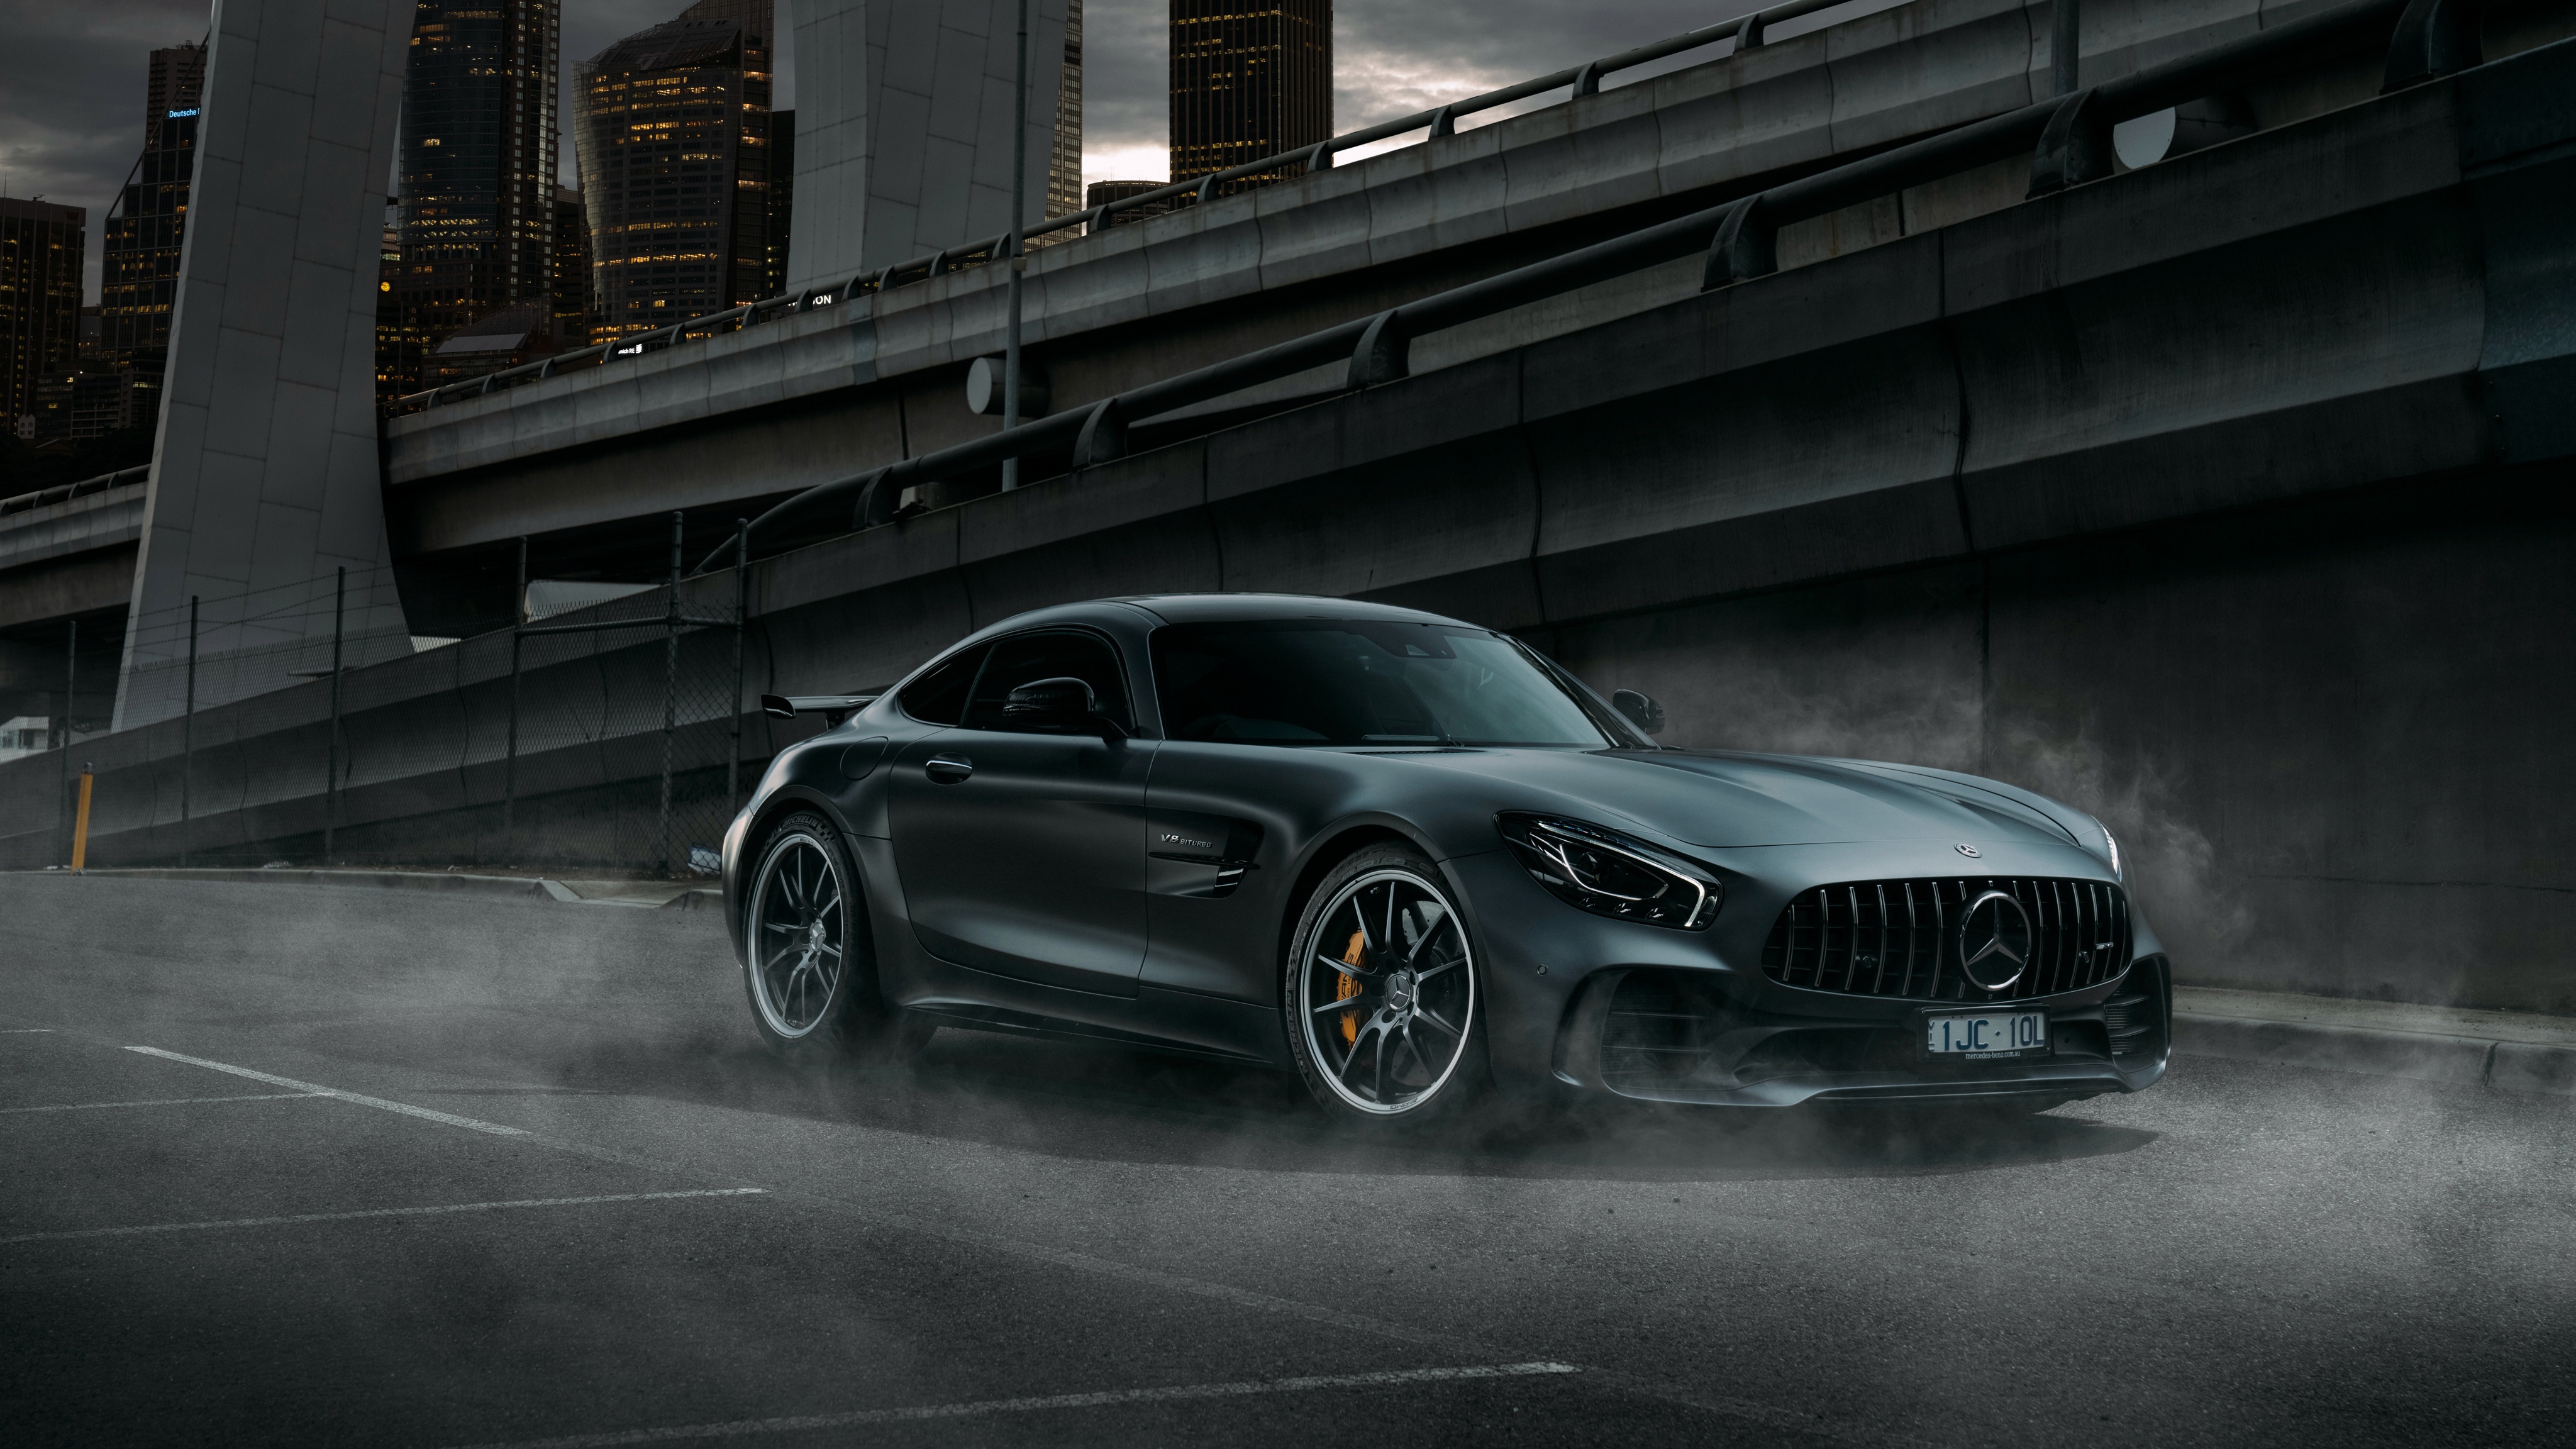 2018 Mercedes Benz GT R AMG, HD Cars, 4k Wallpapers ...